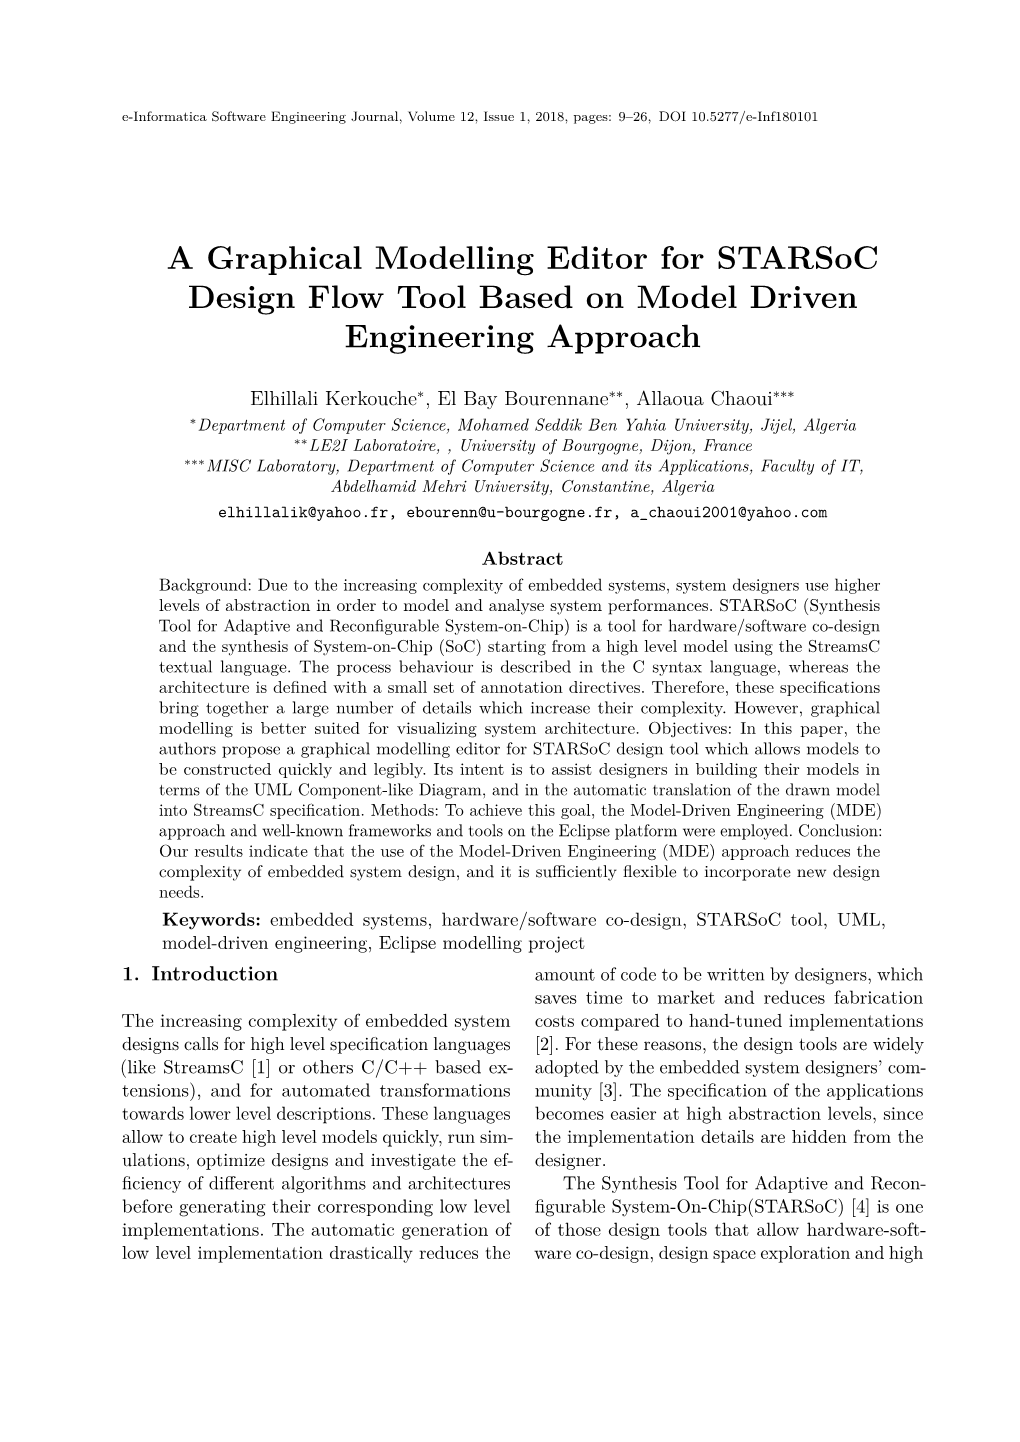 A Graphical Modelling Editor for Starsoc Design Flow Tool Based on Model Driven Engineering Approach